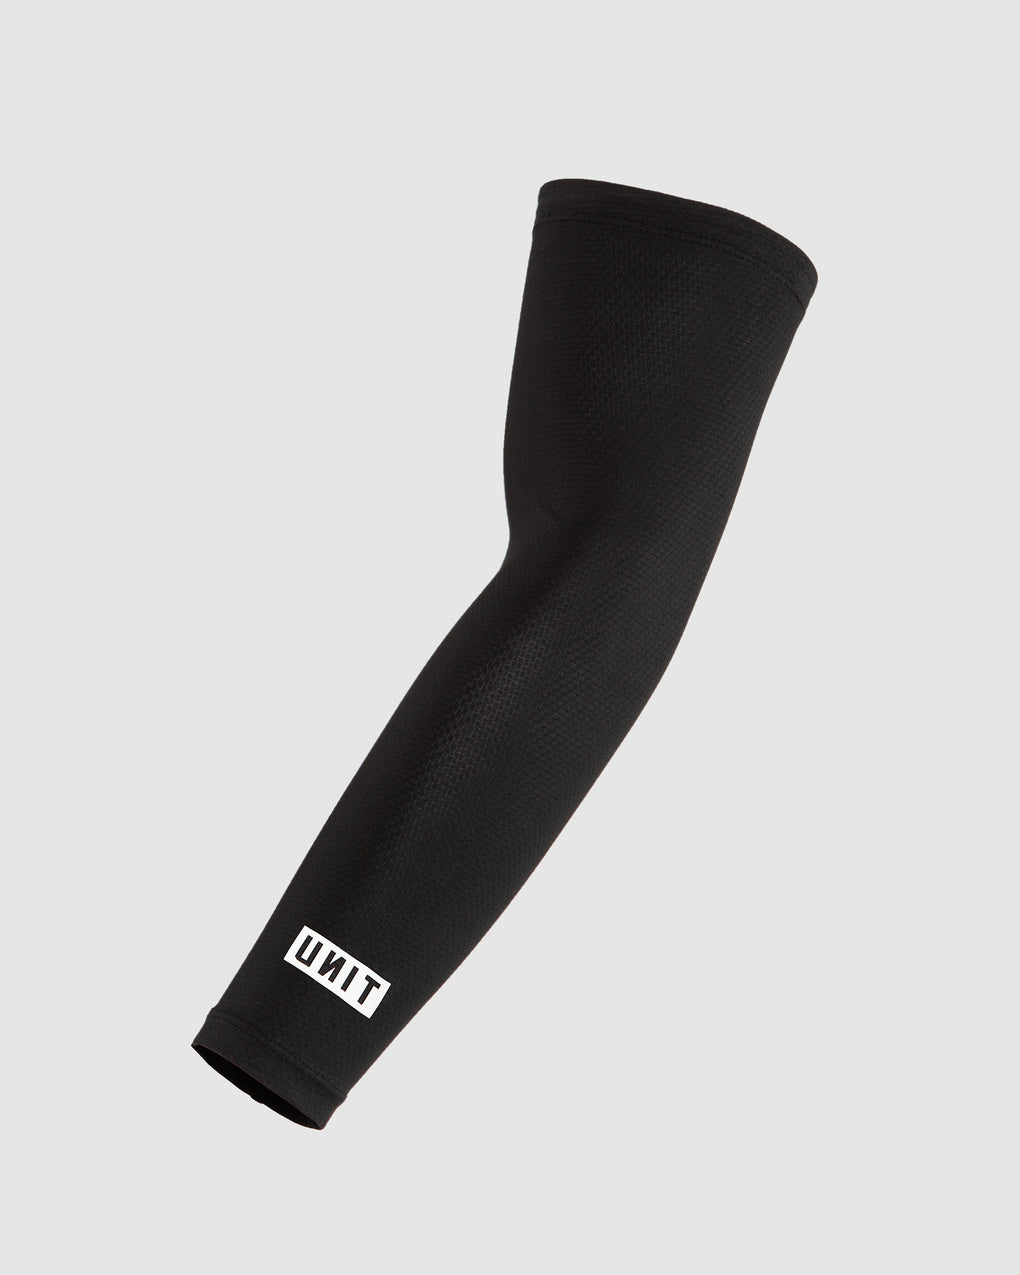 MENS SUN PROTECTION ARM SLEEVES